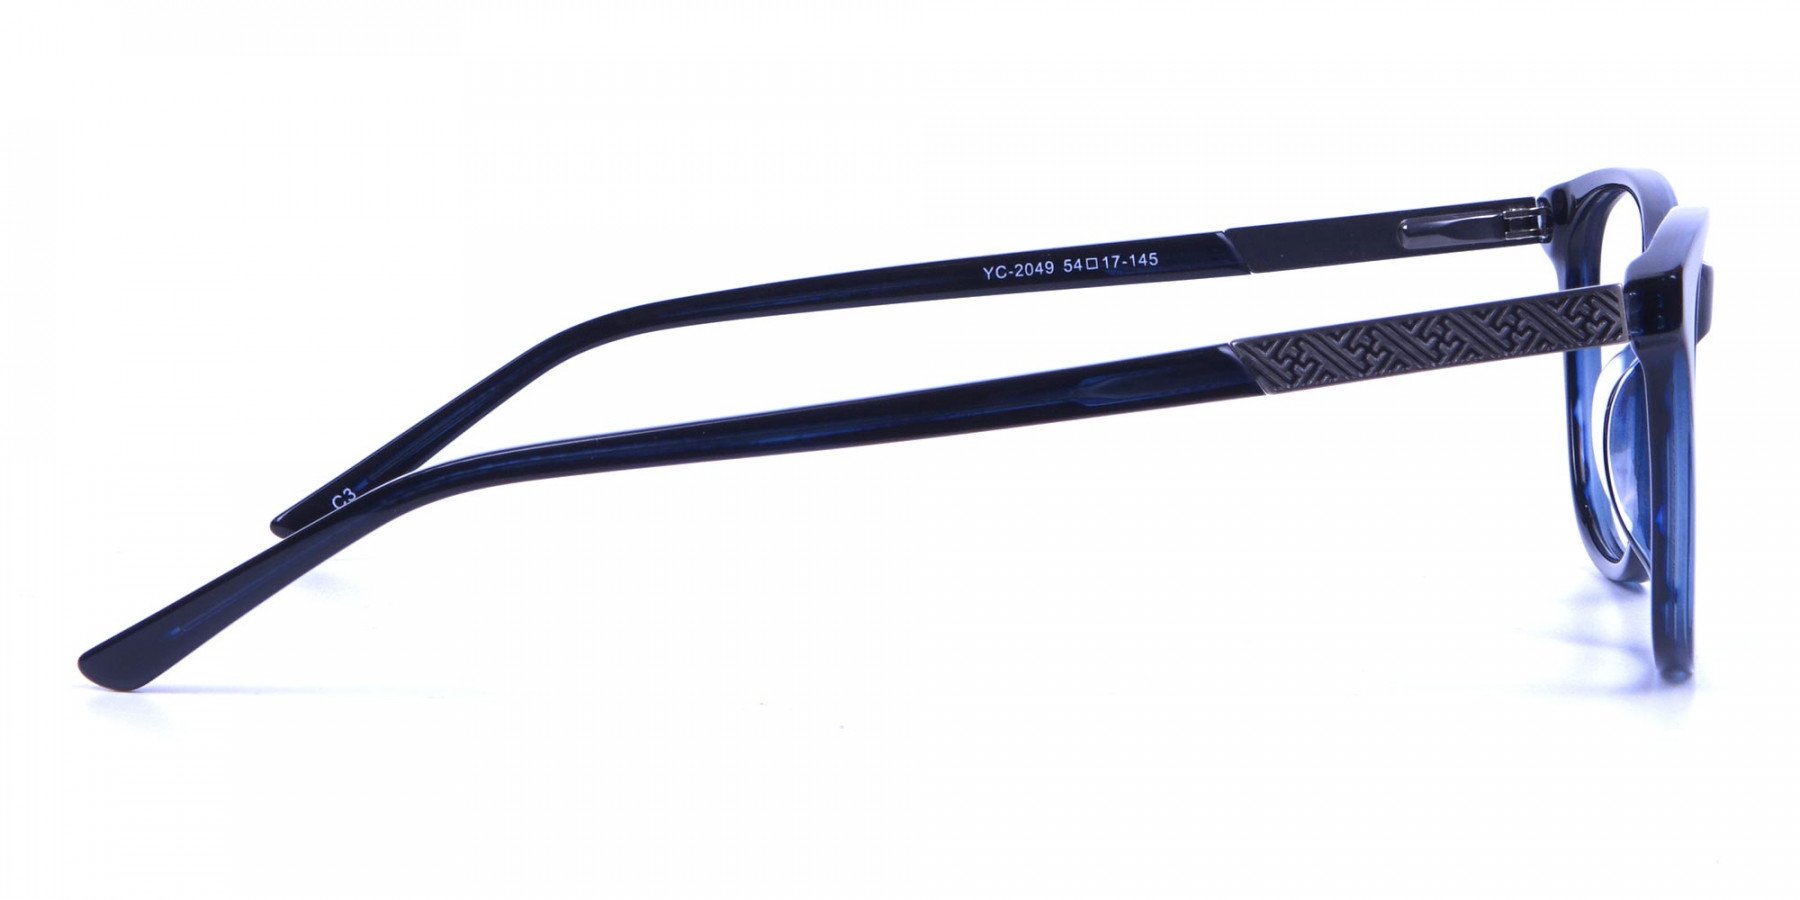 Cat Eye Glasses with Mix Material